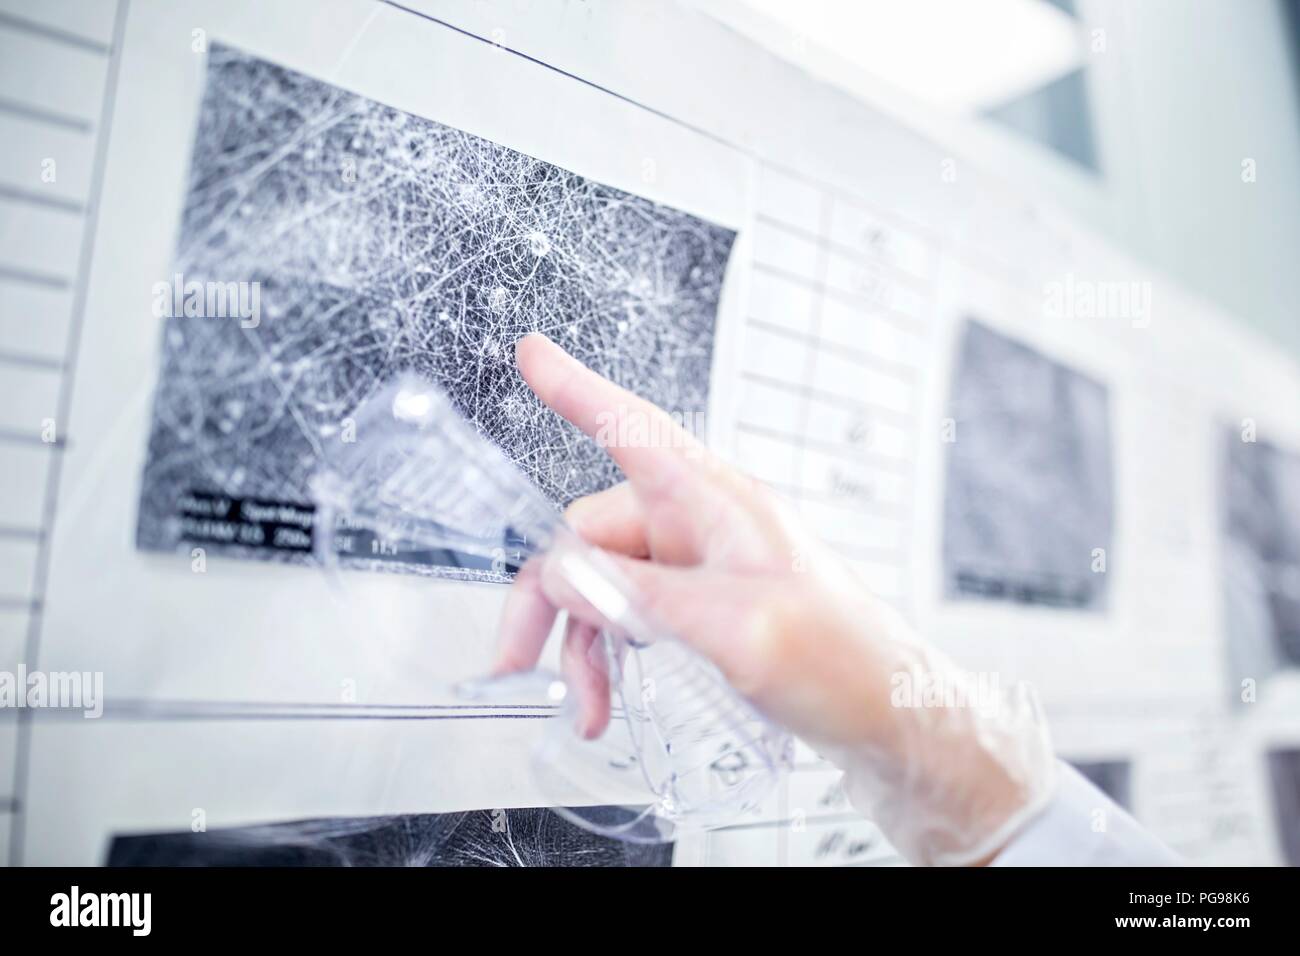 Scientist looking at scanning electron micrographs (SEMs) of different nanofibre structures. Stock Photo